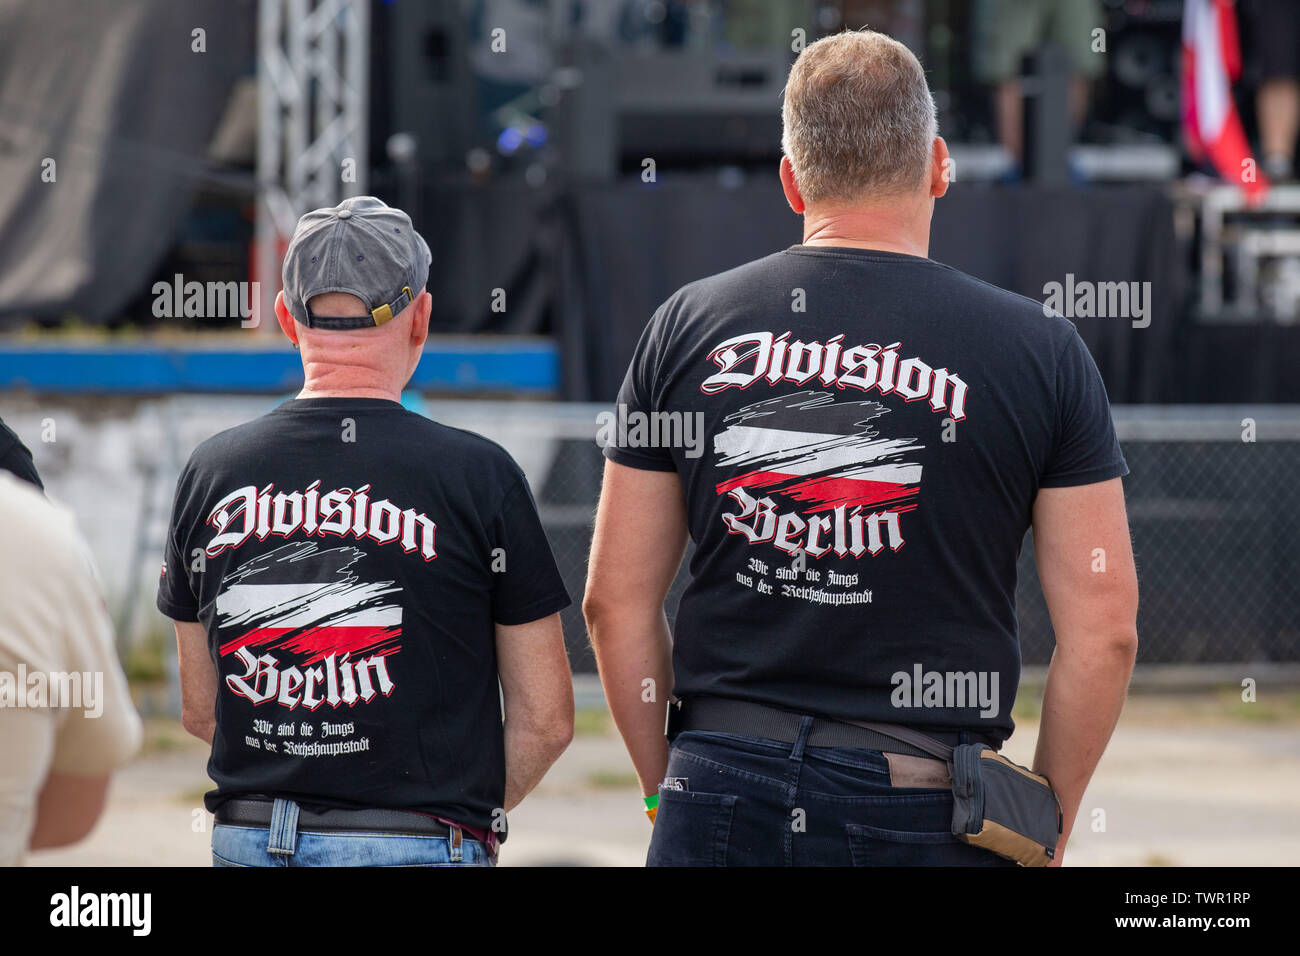 Ostritz, Germany. 22nd June, 2019. Two men stand in front of a stage on the  grounds